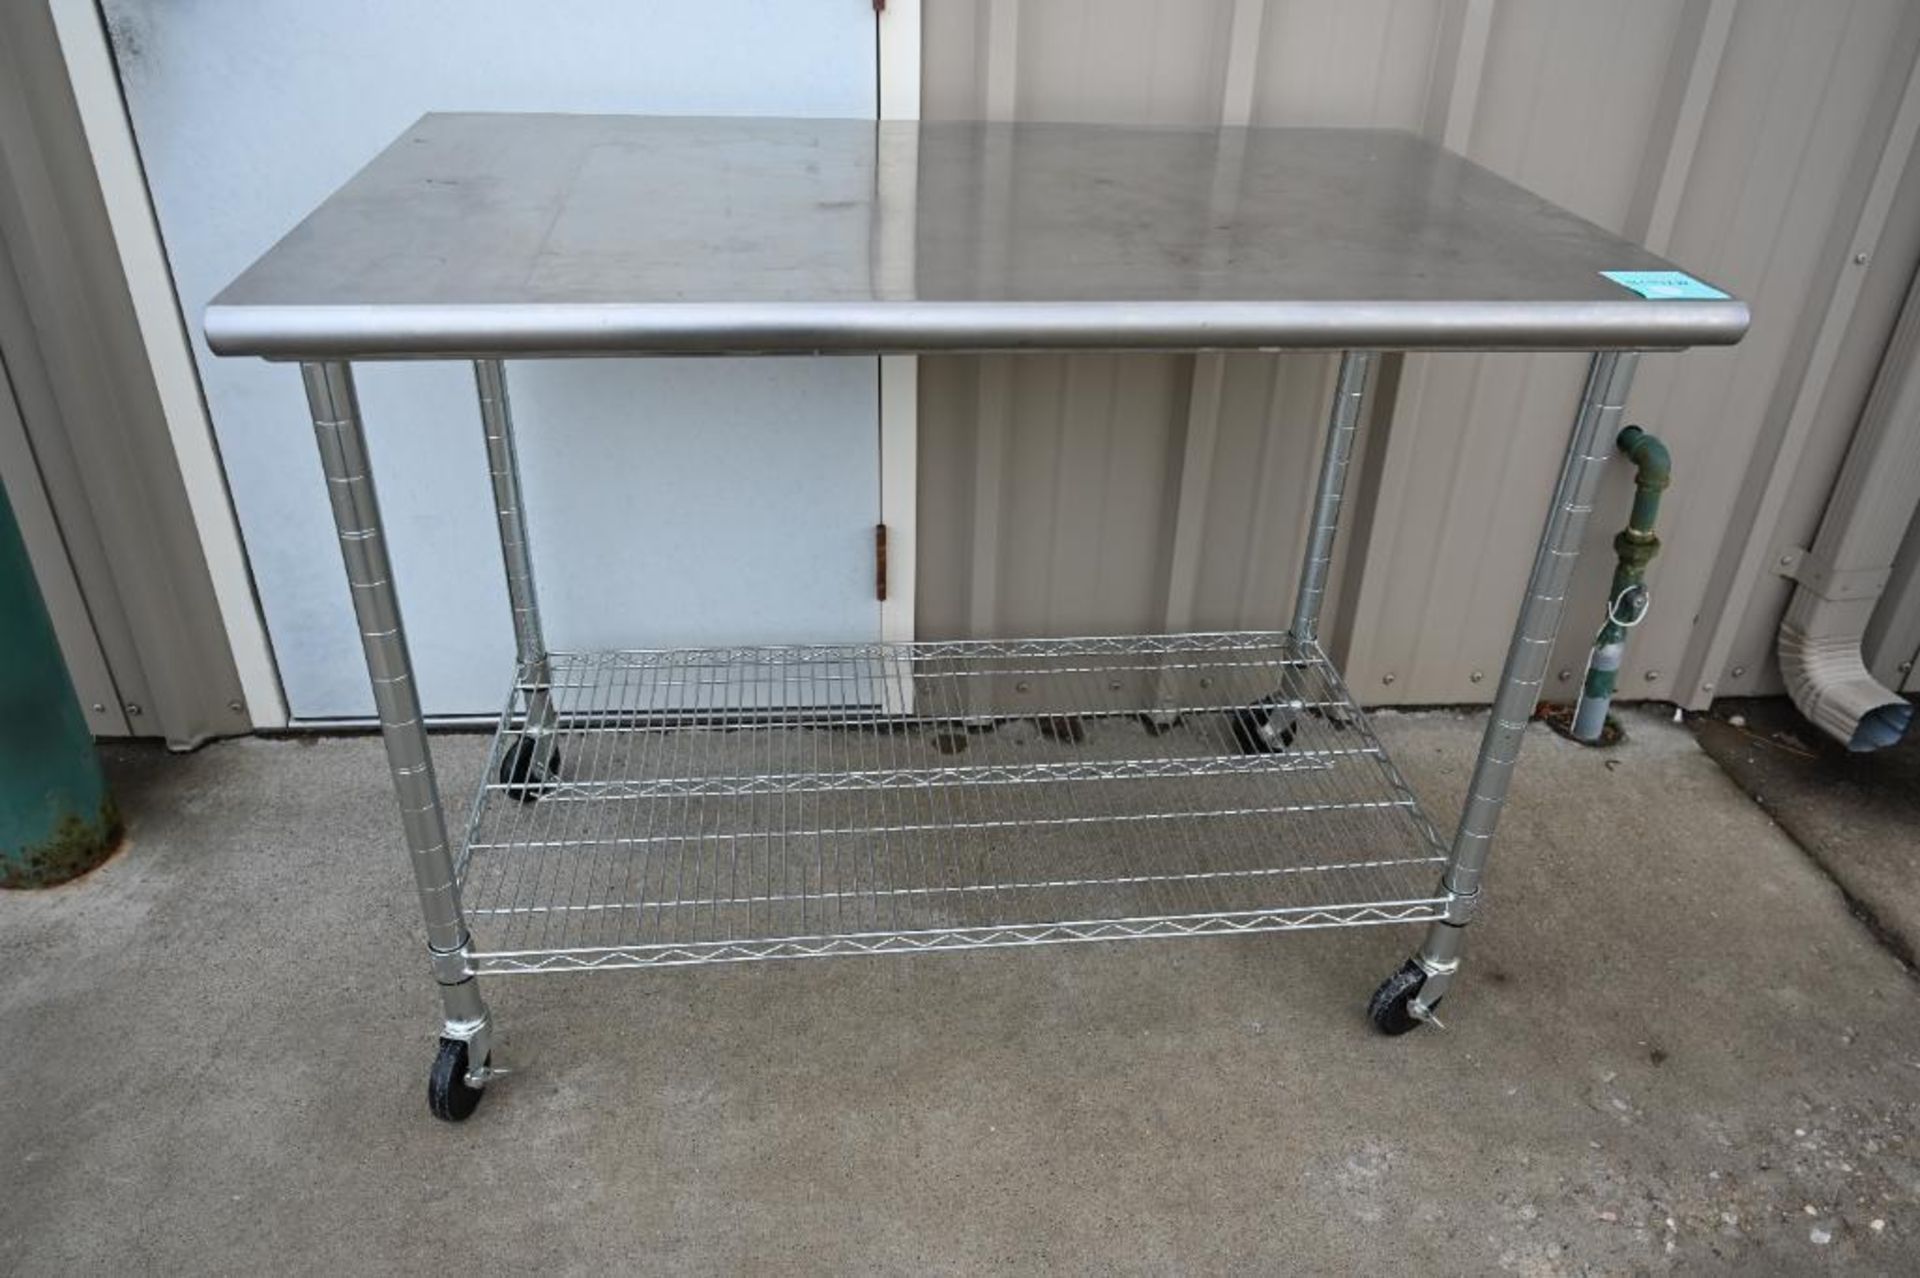 NSF 48" Stainless Steel Work Table with Casters - Image 2 of 10